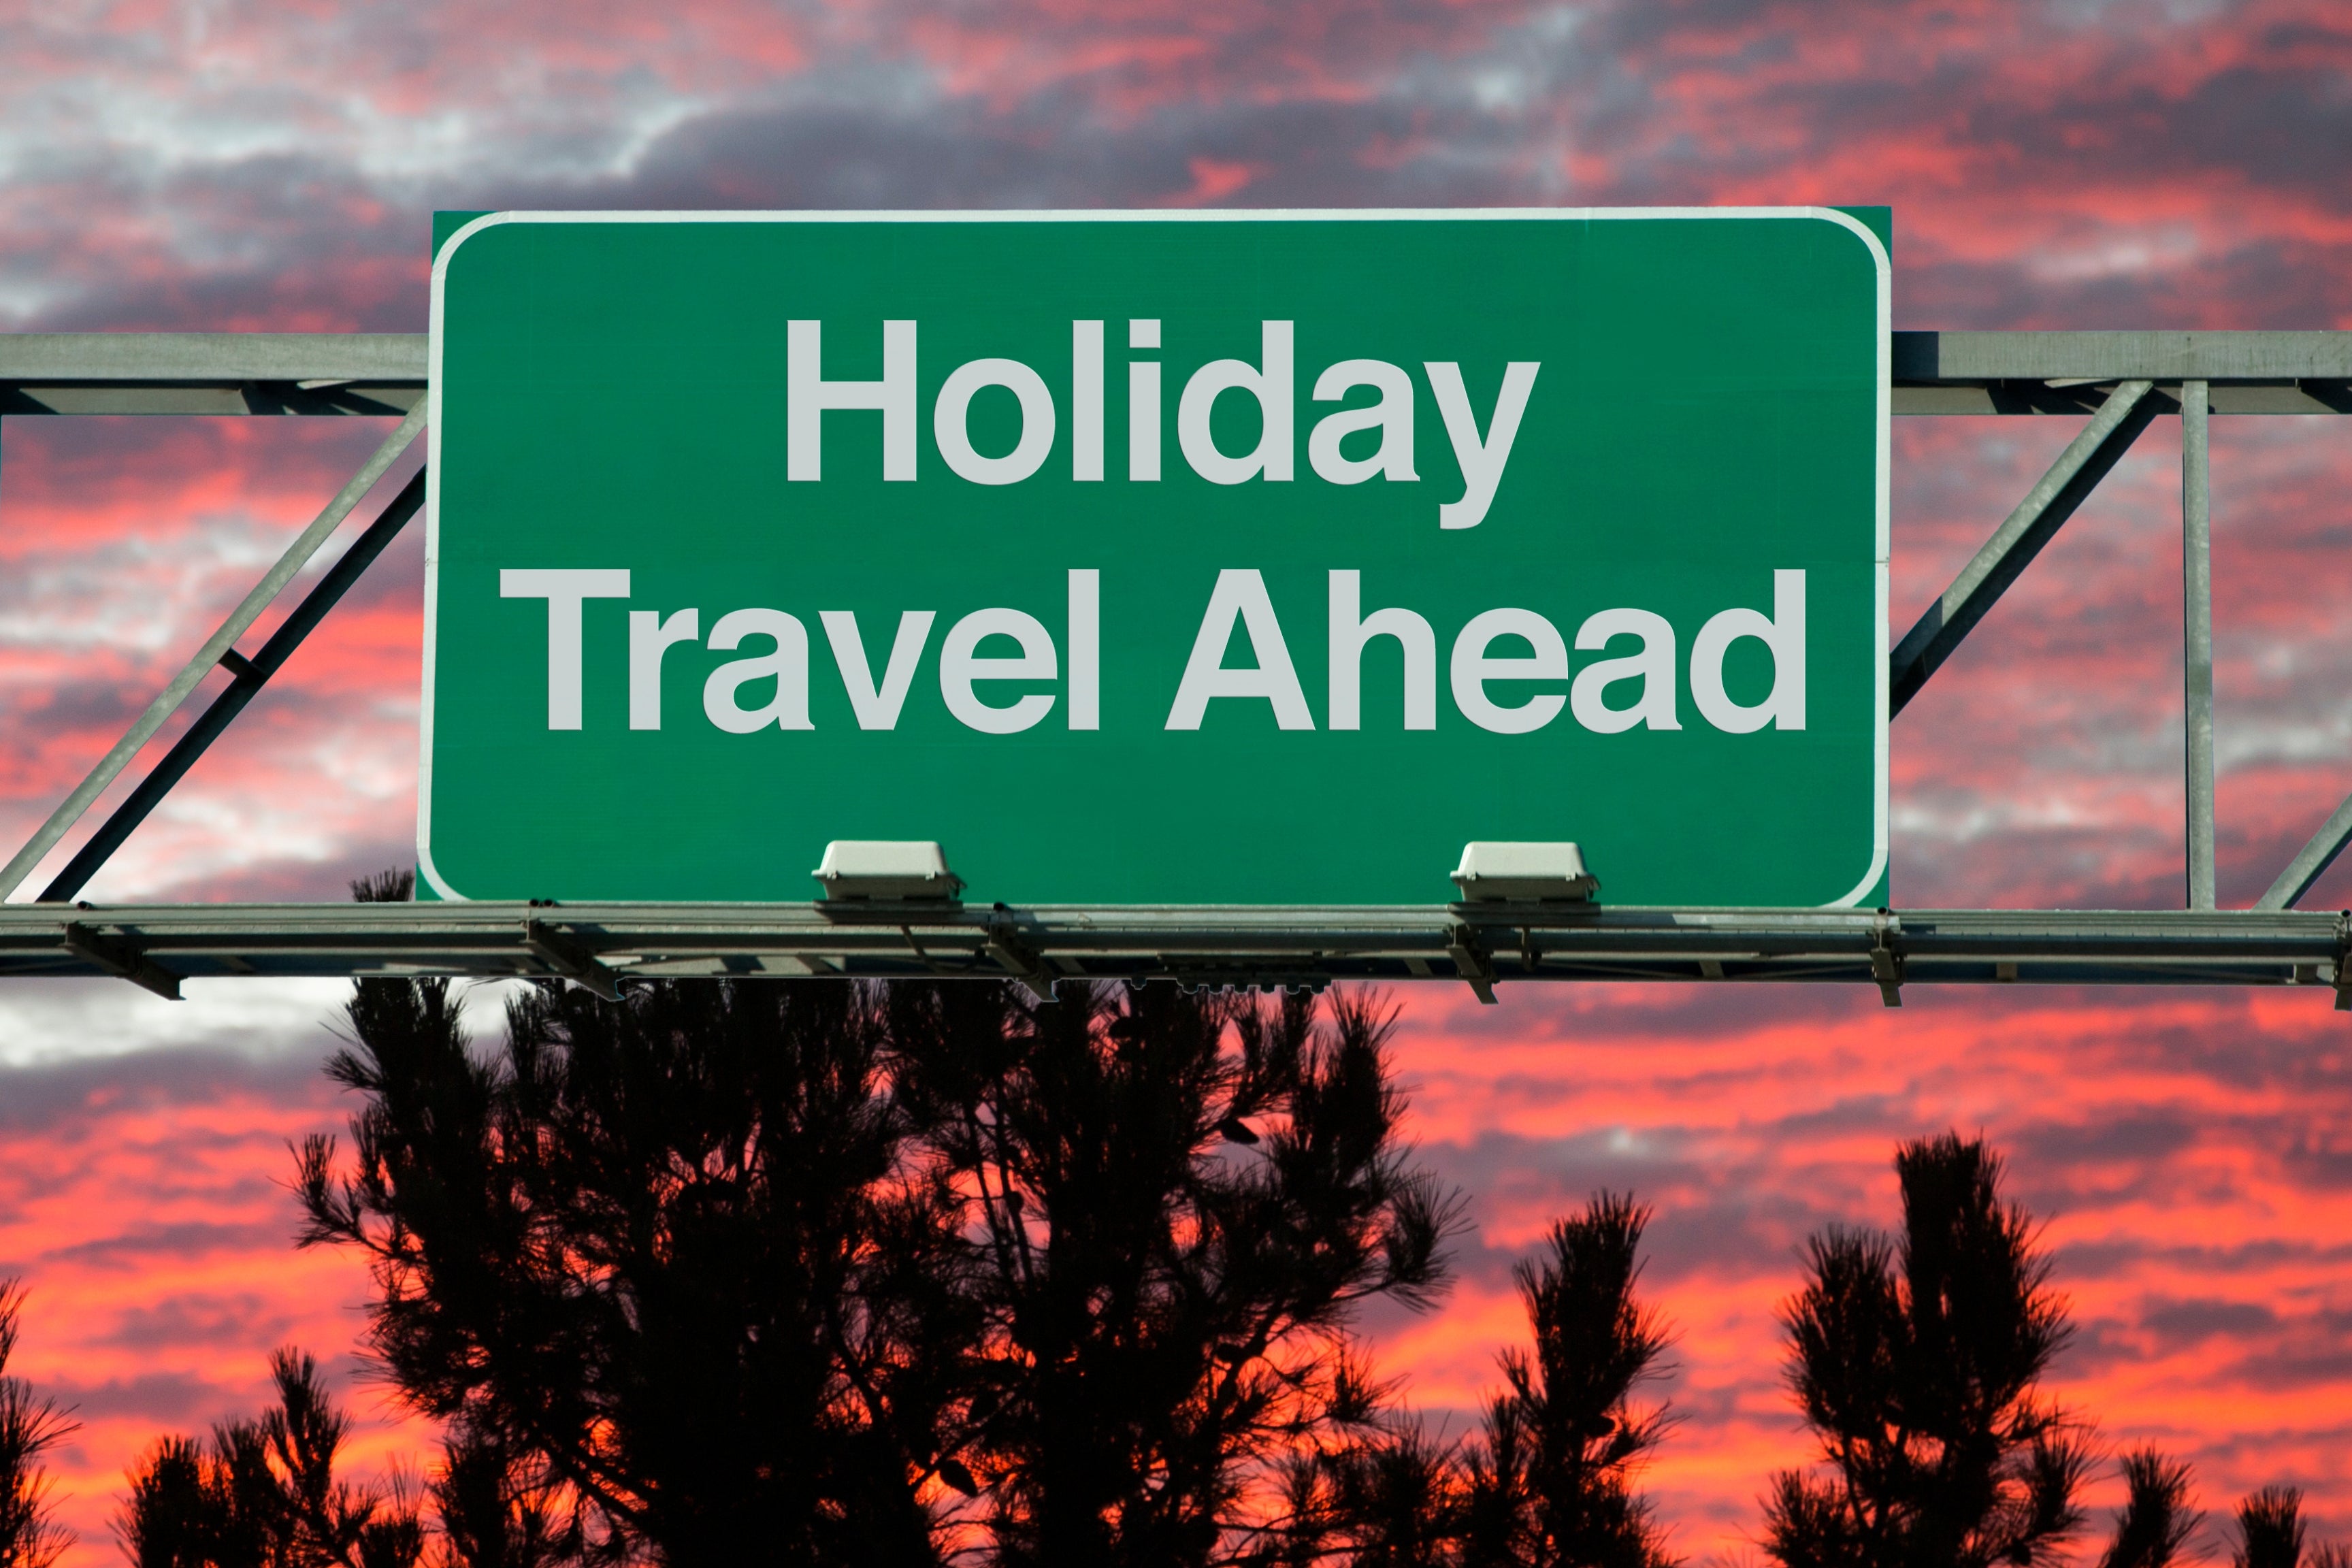 Avoid the 5 Biggest Mistakes People Make When Traveling During the Holidays